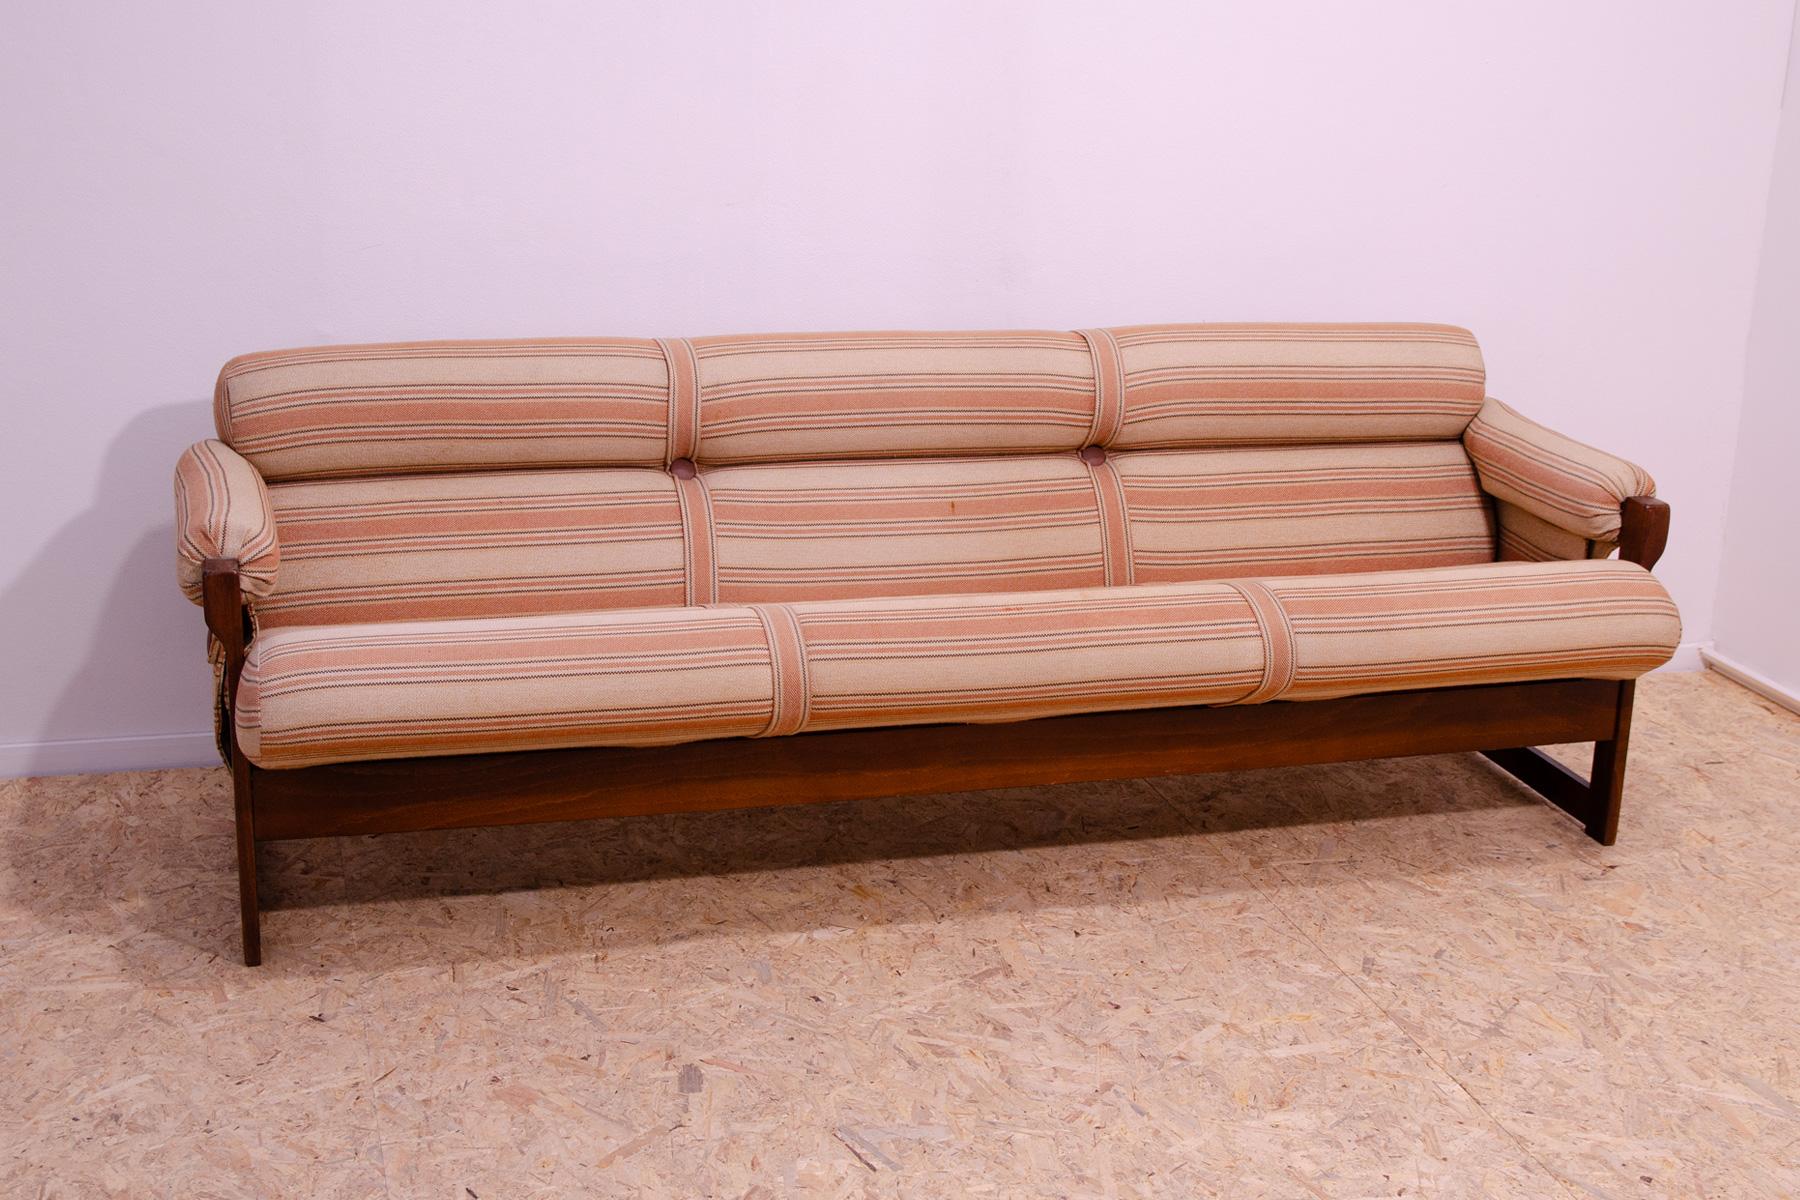 This lounge Scandinavian style three seater sofa was made by Hikor Písek company in the 1980´. It´s upholstered with fabric. The structure is made of beech wood. All in good Vintage condition, shows signs of age and use. In a few places, light